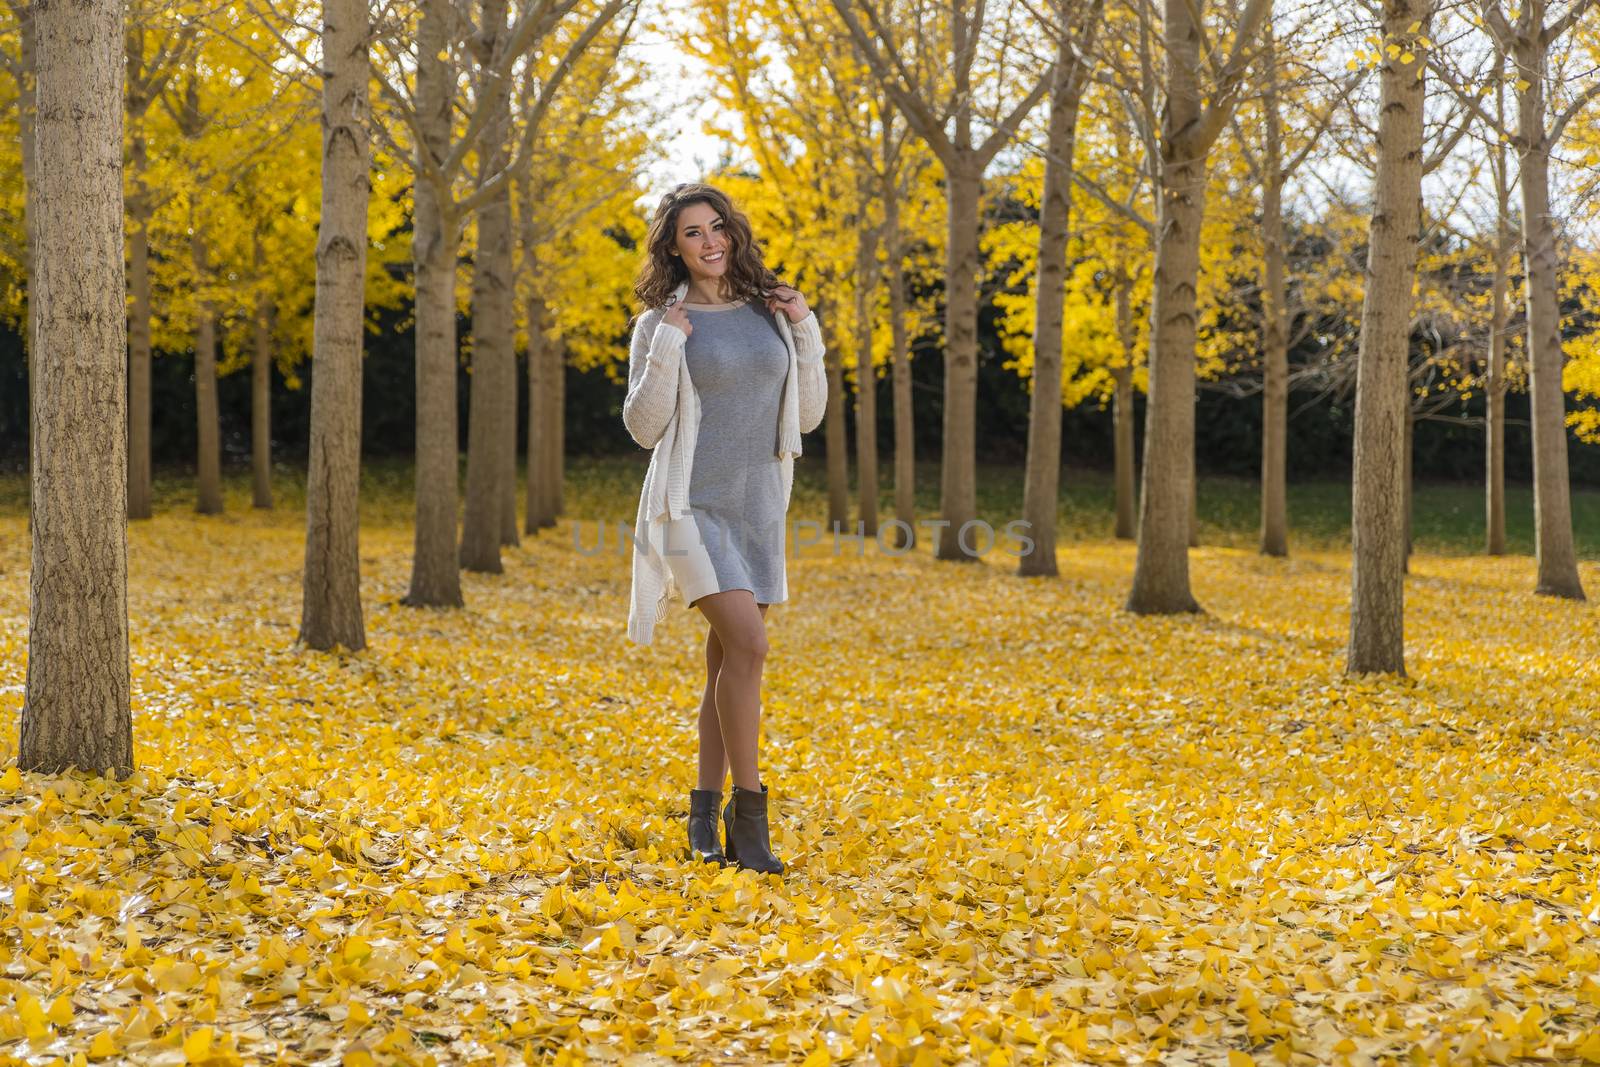 Brunette Model In Fall Foliage by actionsports